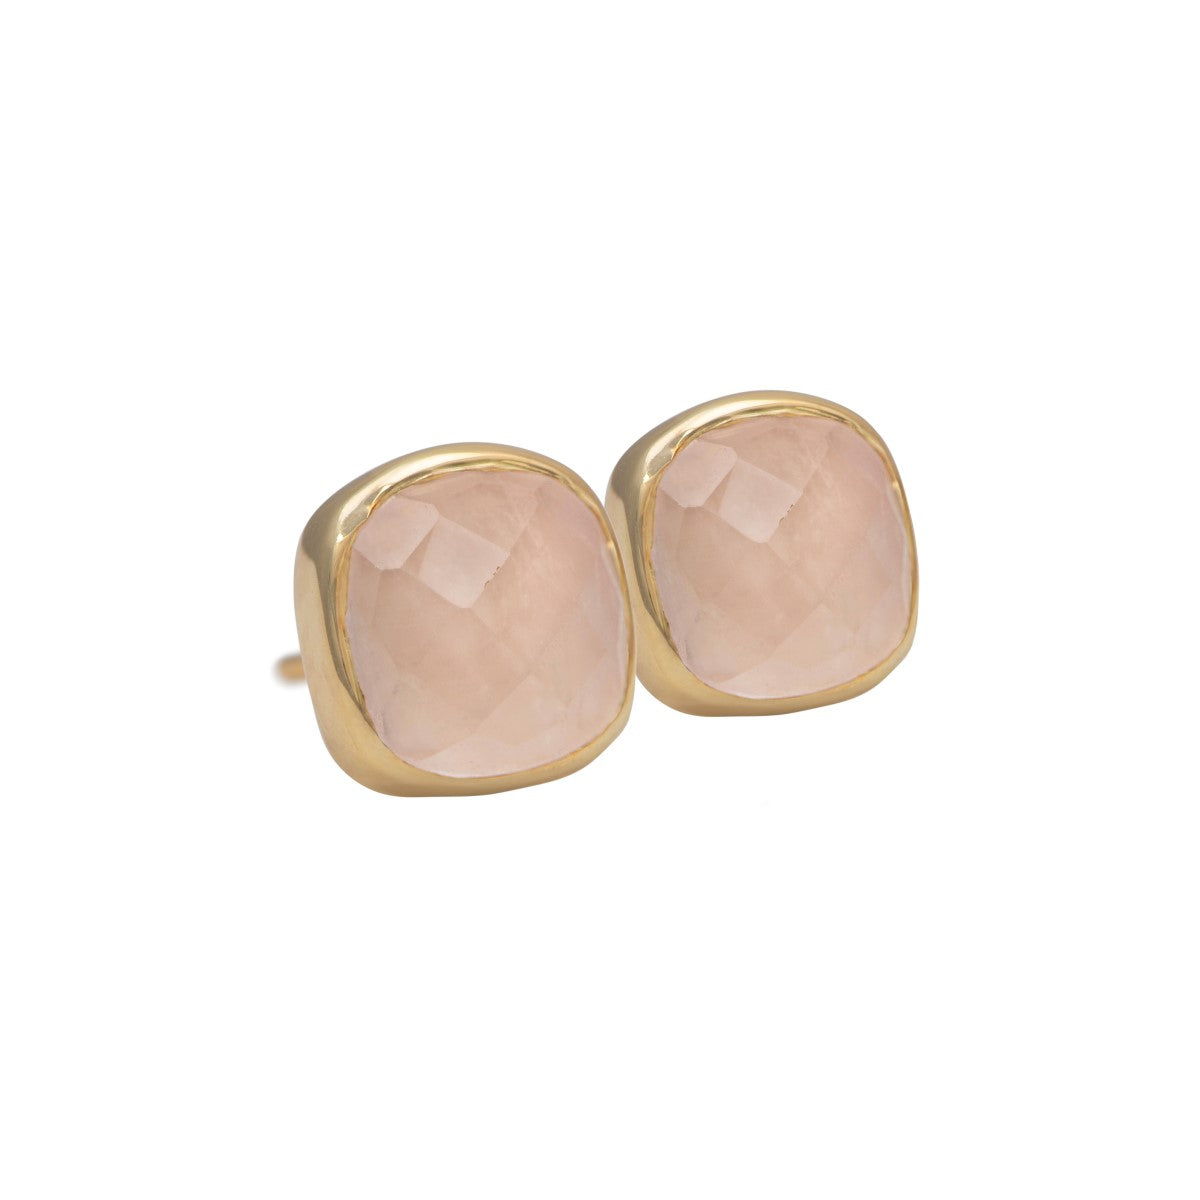 Faceted Square Rose Quartz Gemstone Stud Earrings in Gold Plated Sterling Silver